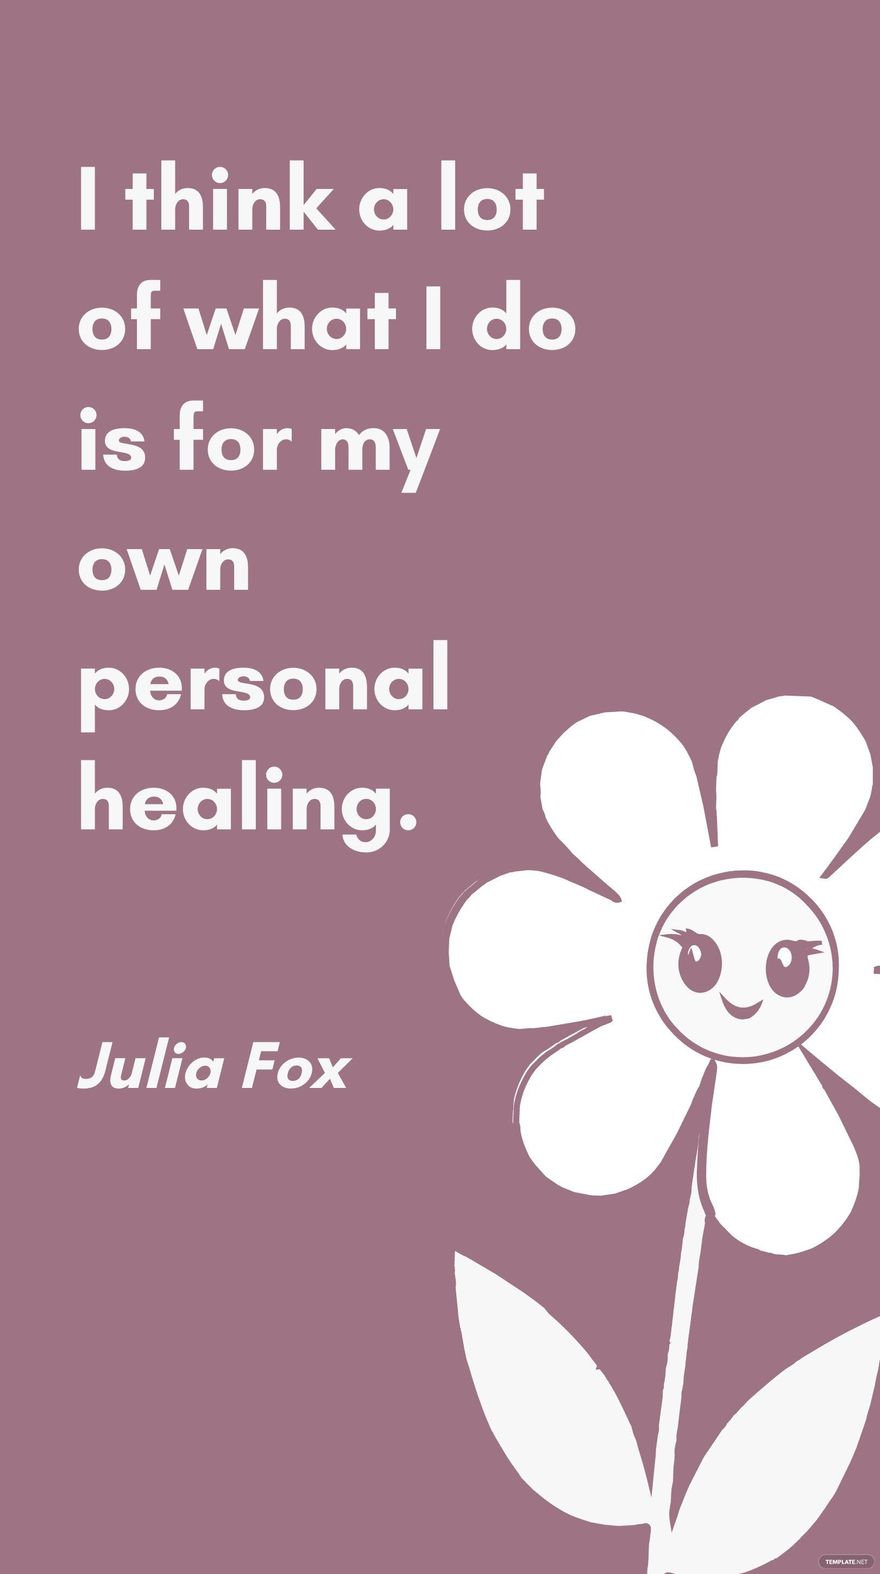 Free Julia Fox - I think a lot of what I do is for my own personal healing. in JPG